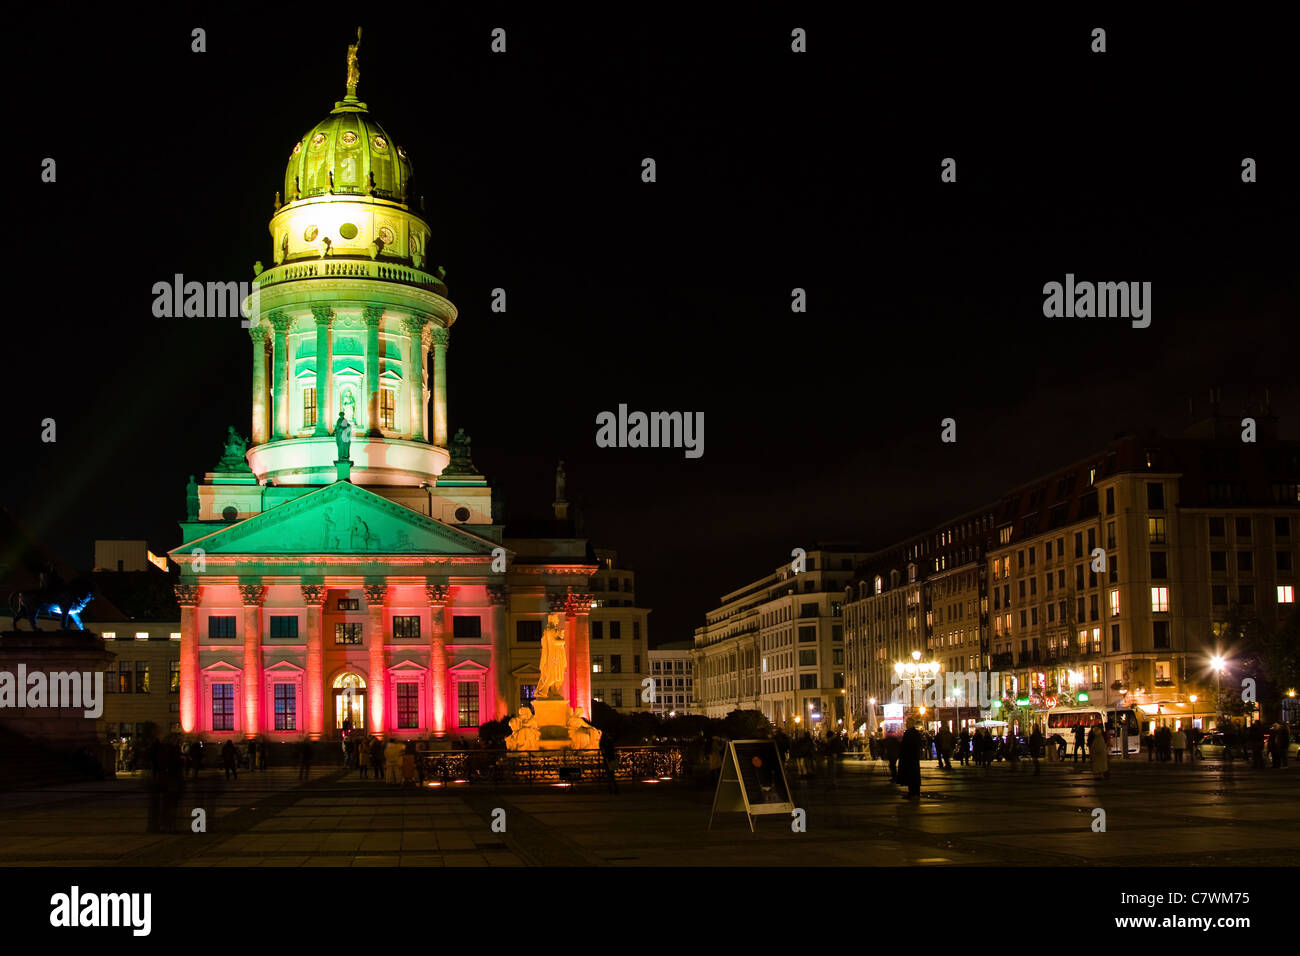 Image taken at night of the French Cathedral during the Festival of Lights in Berlin in October 2010. Stock Photo